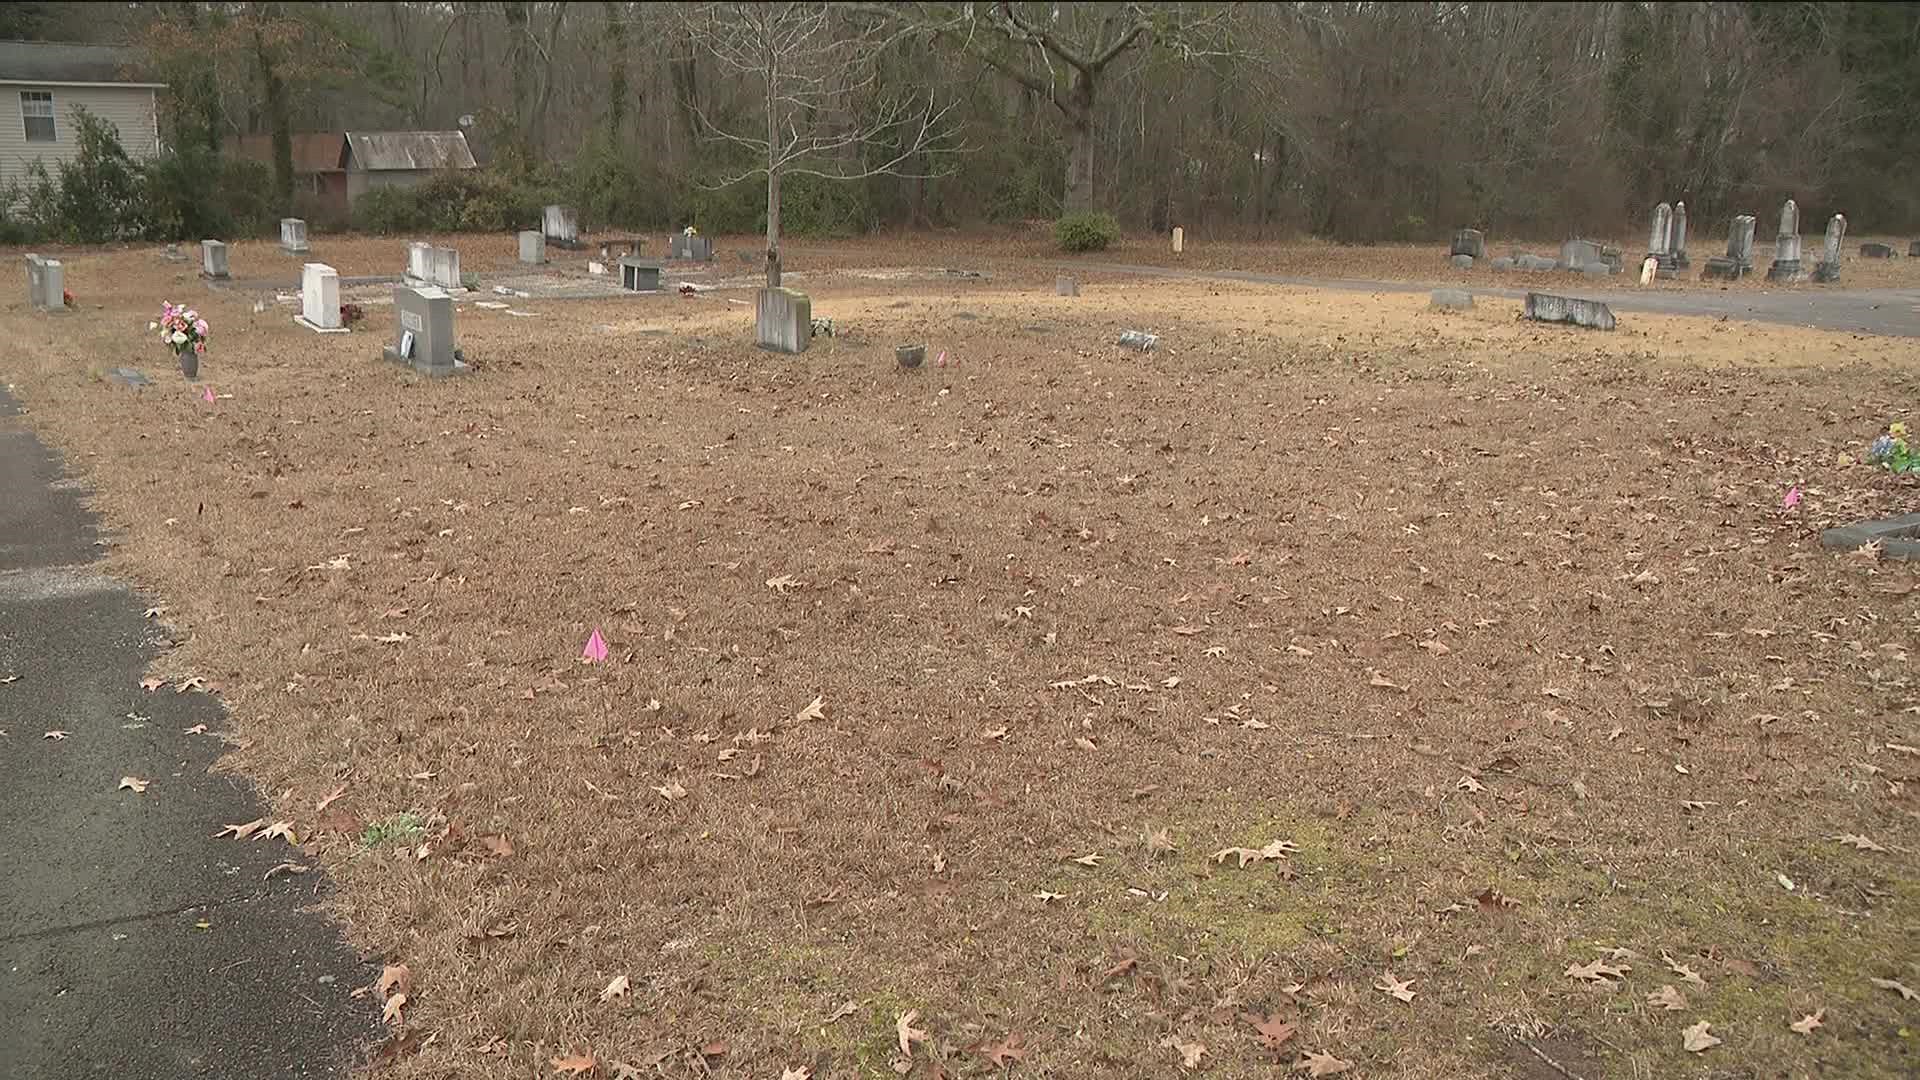 "Totally frustrated" widow says the city that runs the cemetery won't communicate.